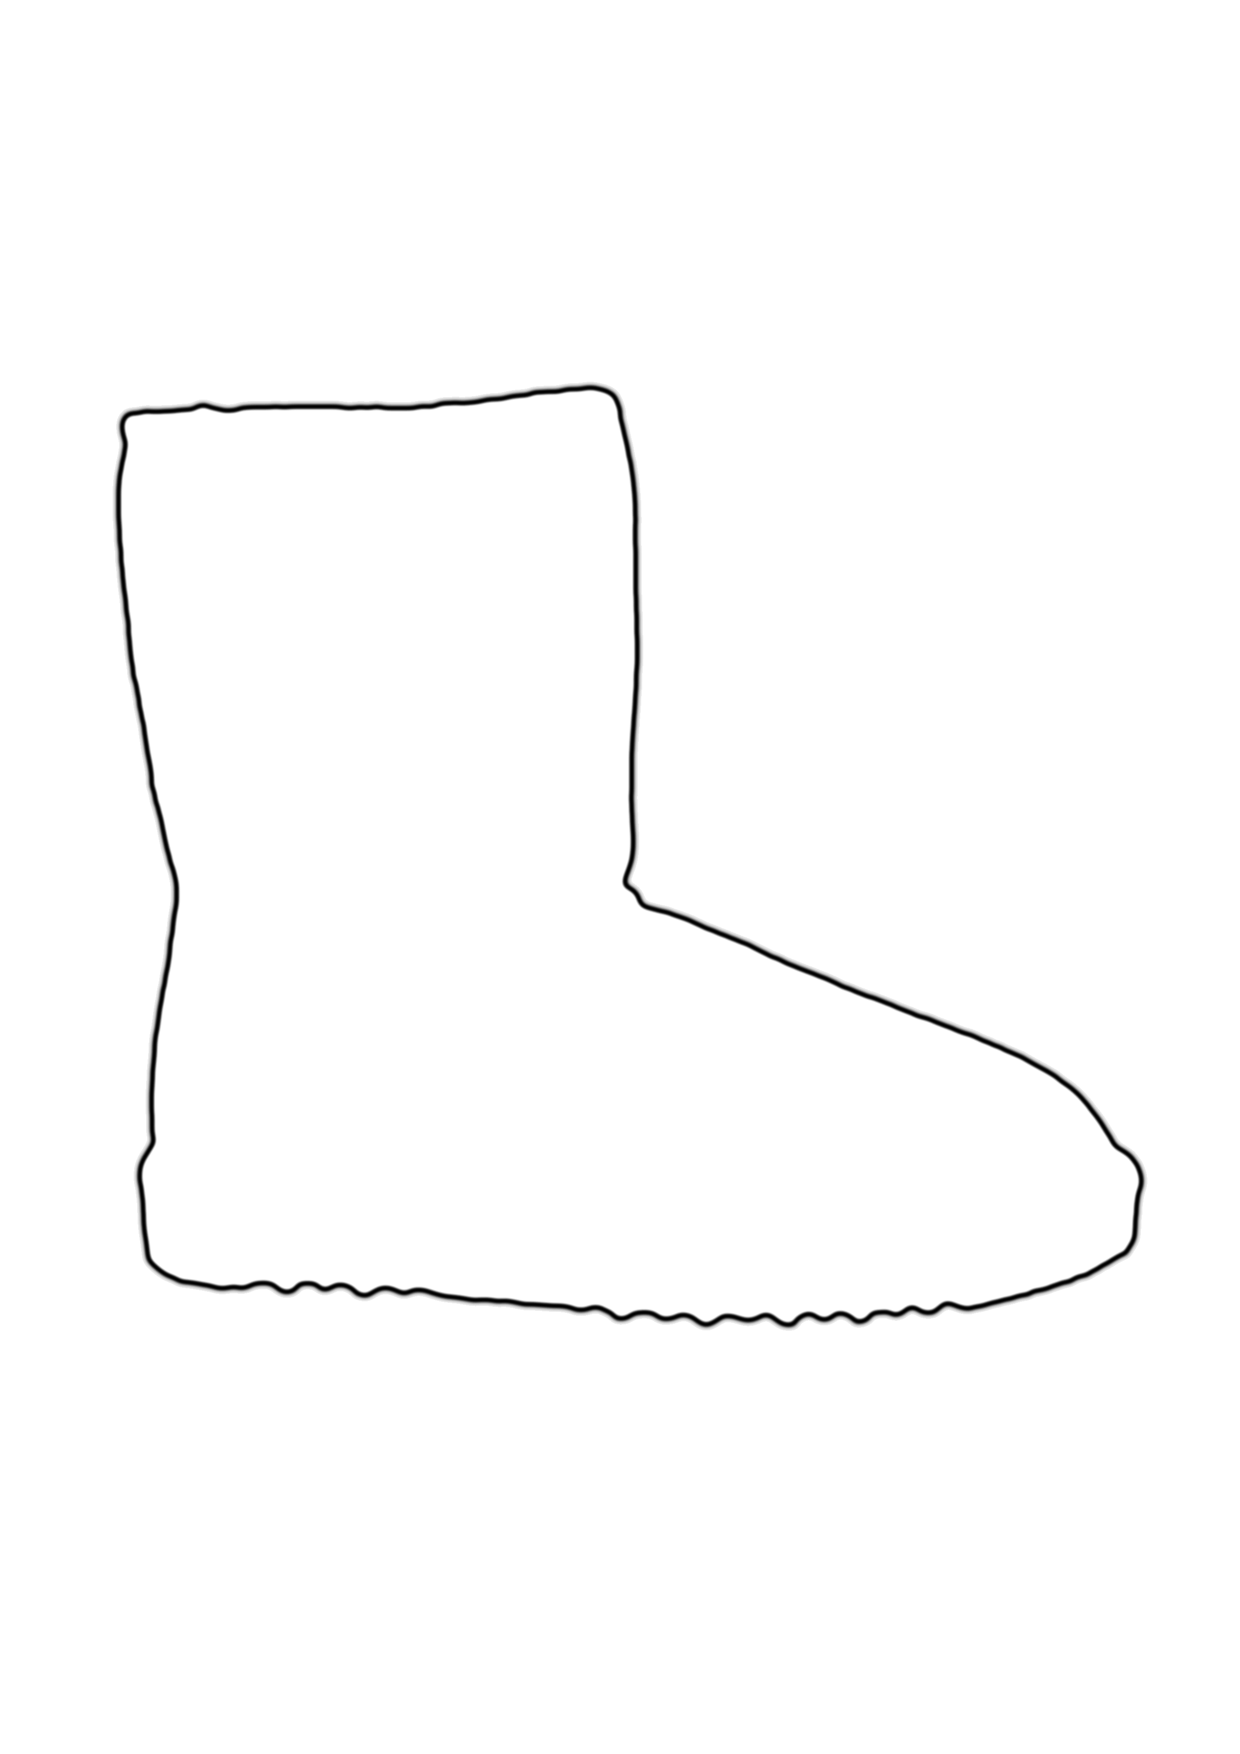 Winter Boots Black And White Clipart - Clipart Kid